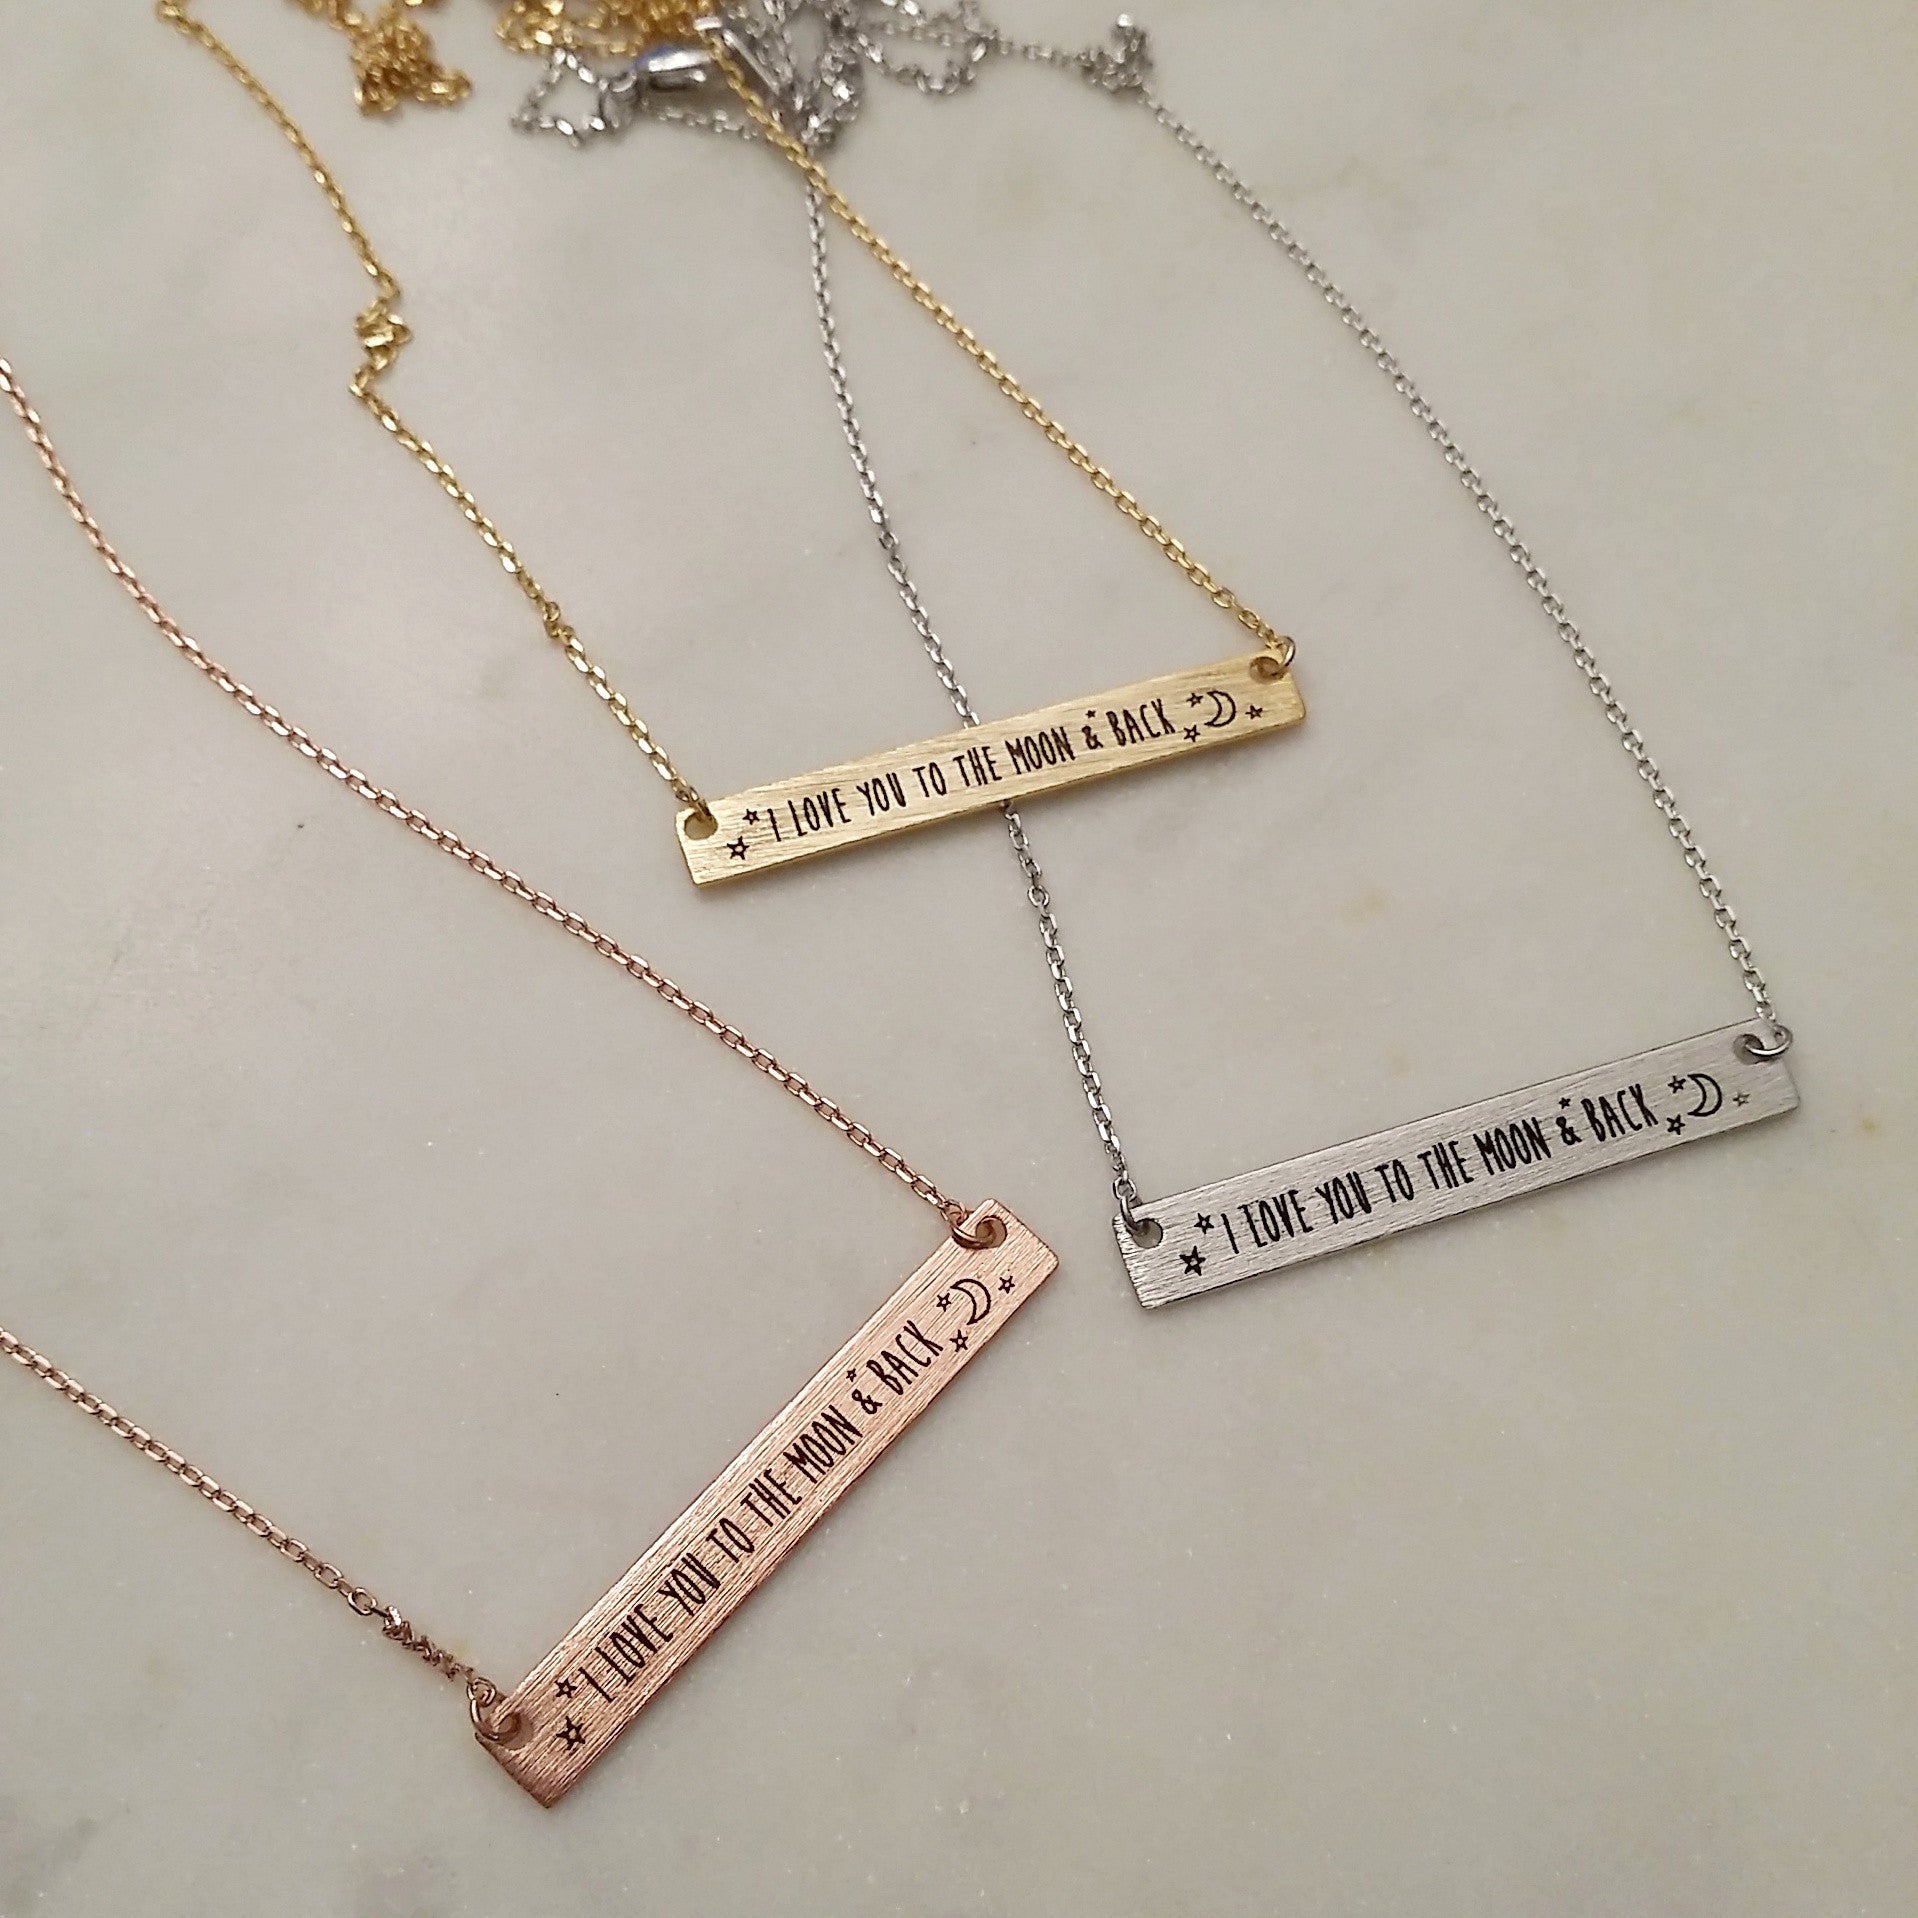 Spartina 449 Sea La Vie To the Moon and Back Necklace in Gold | The Paper  Store